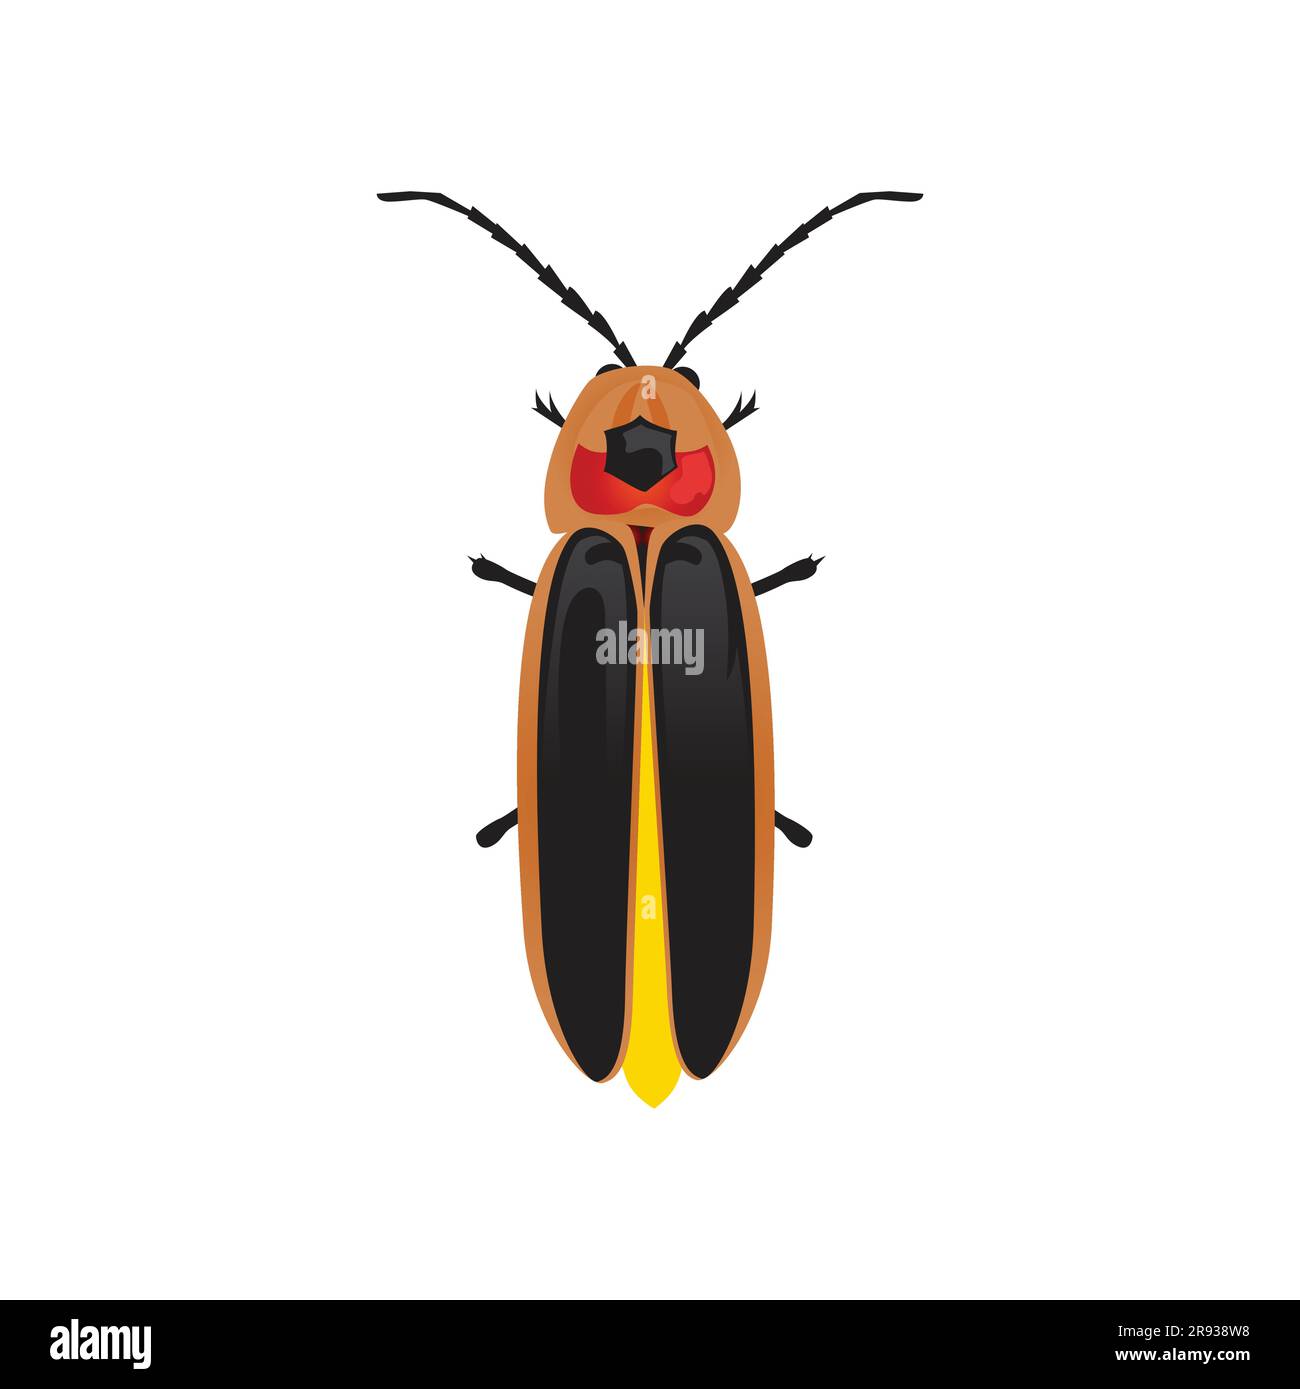 Firefly, Lampyridae Insect, Bug Insect, Bug Insect Illustrazione Vettoriale